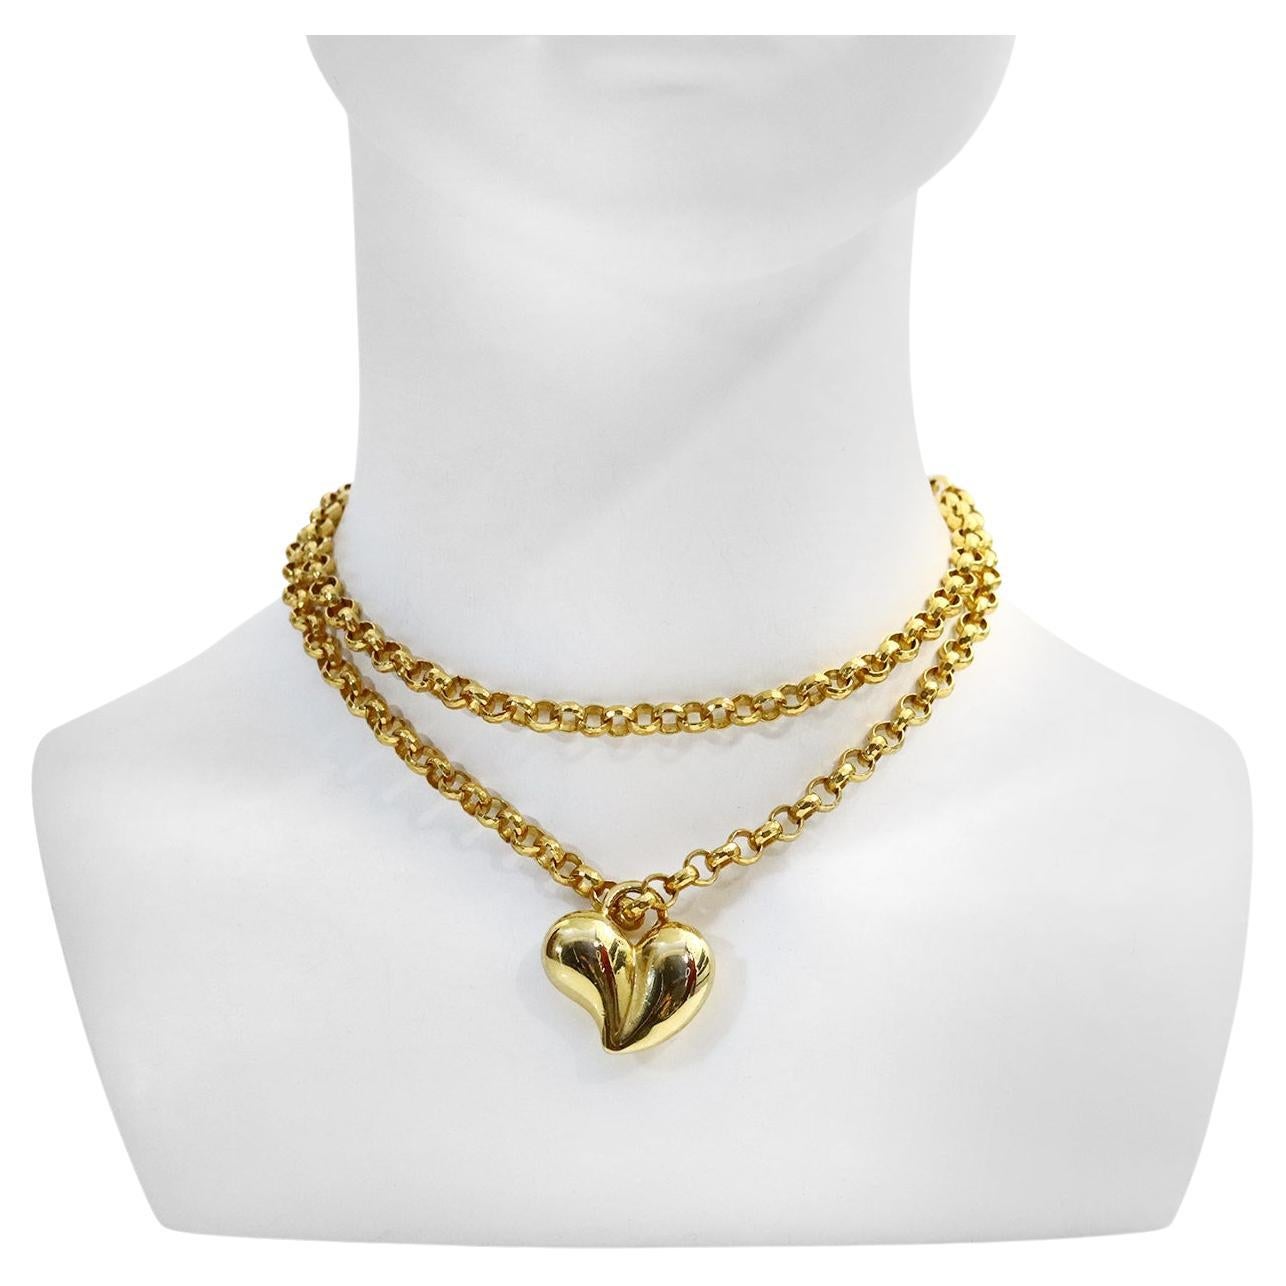 Vintage Gold Tone Solid Heart on Link Toggle Chain Necklace. 35